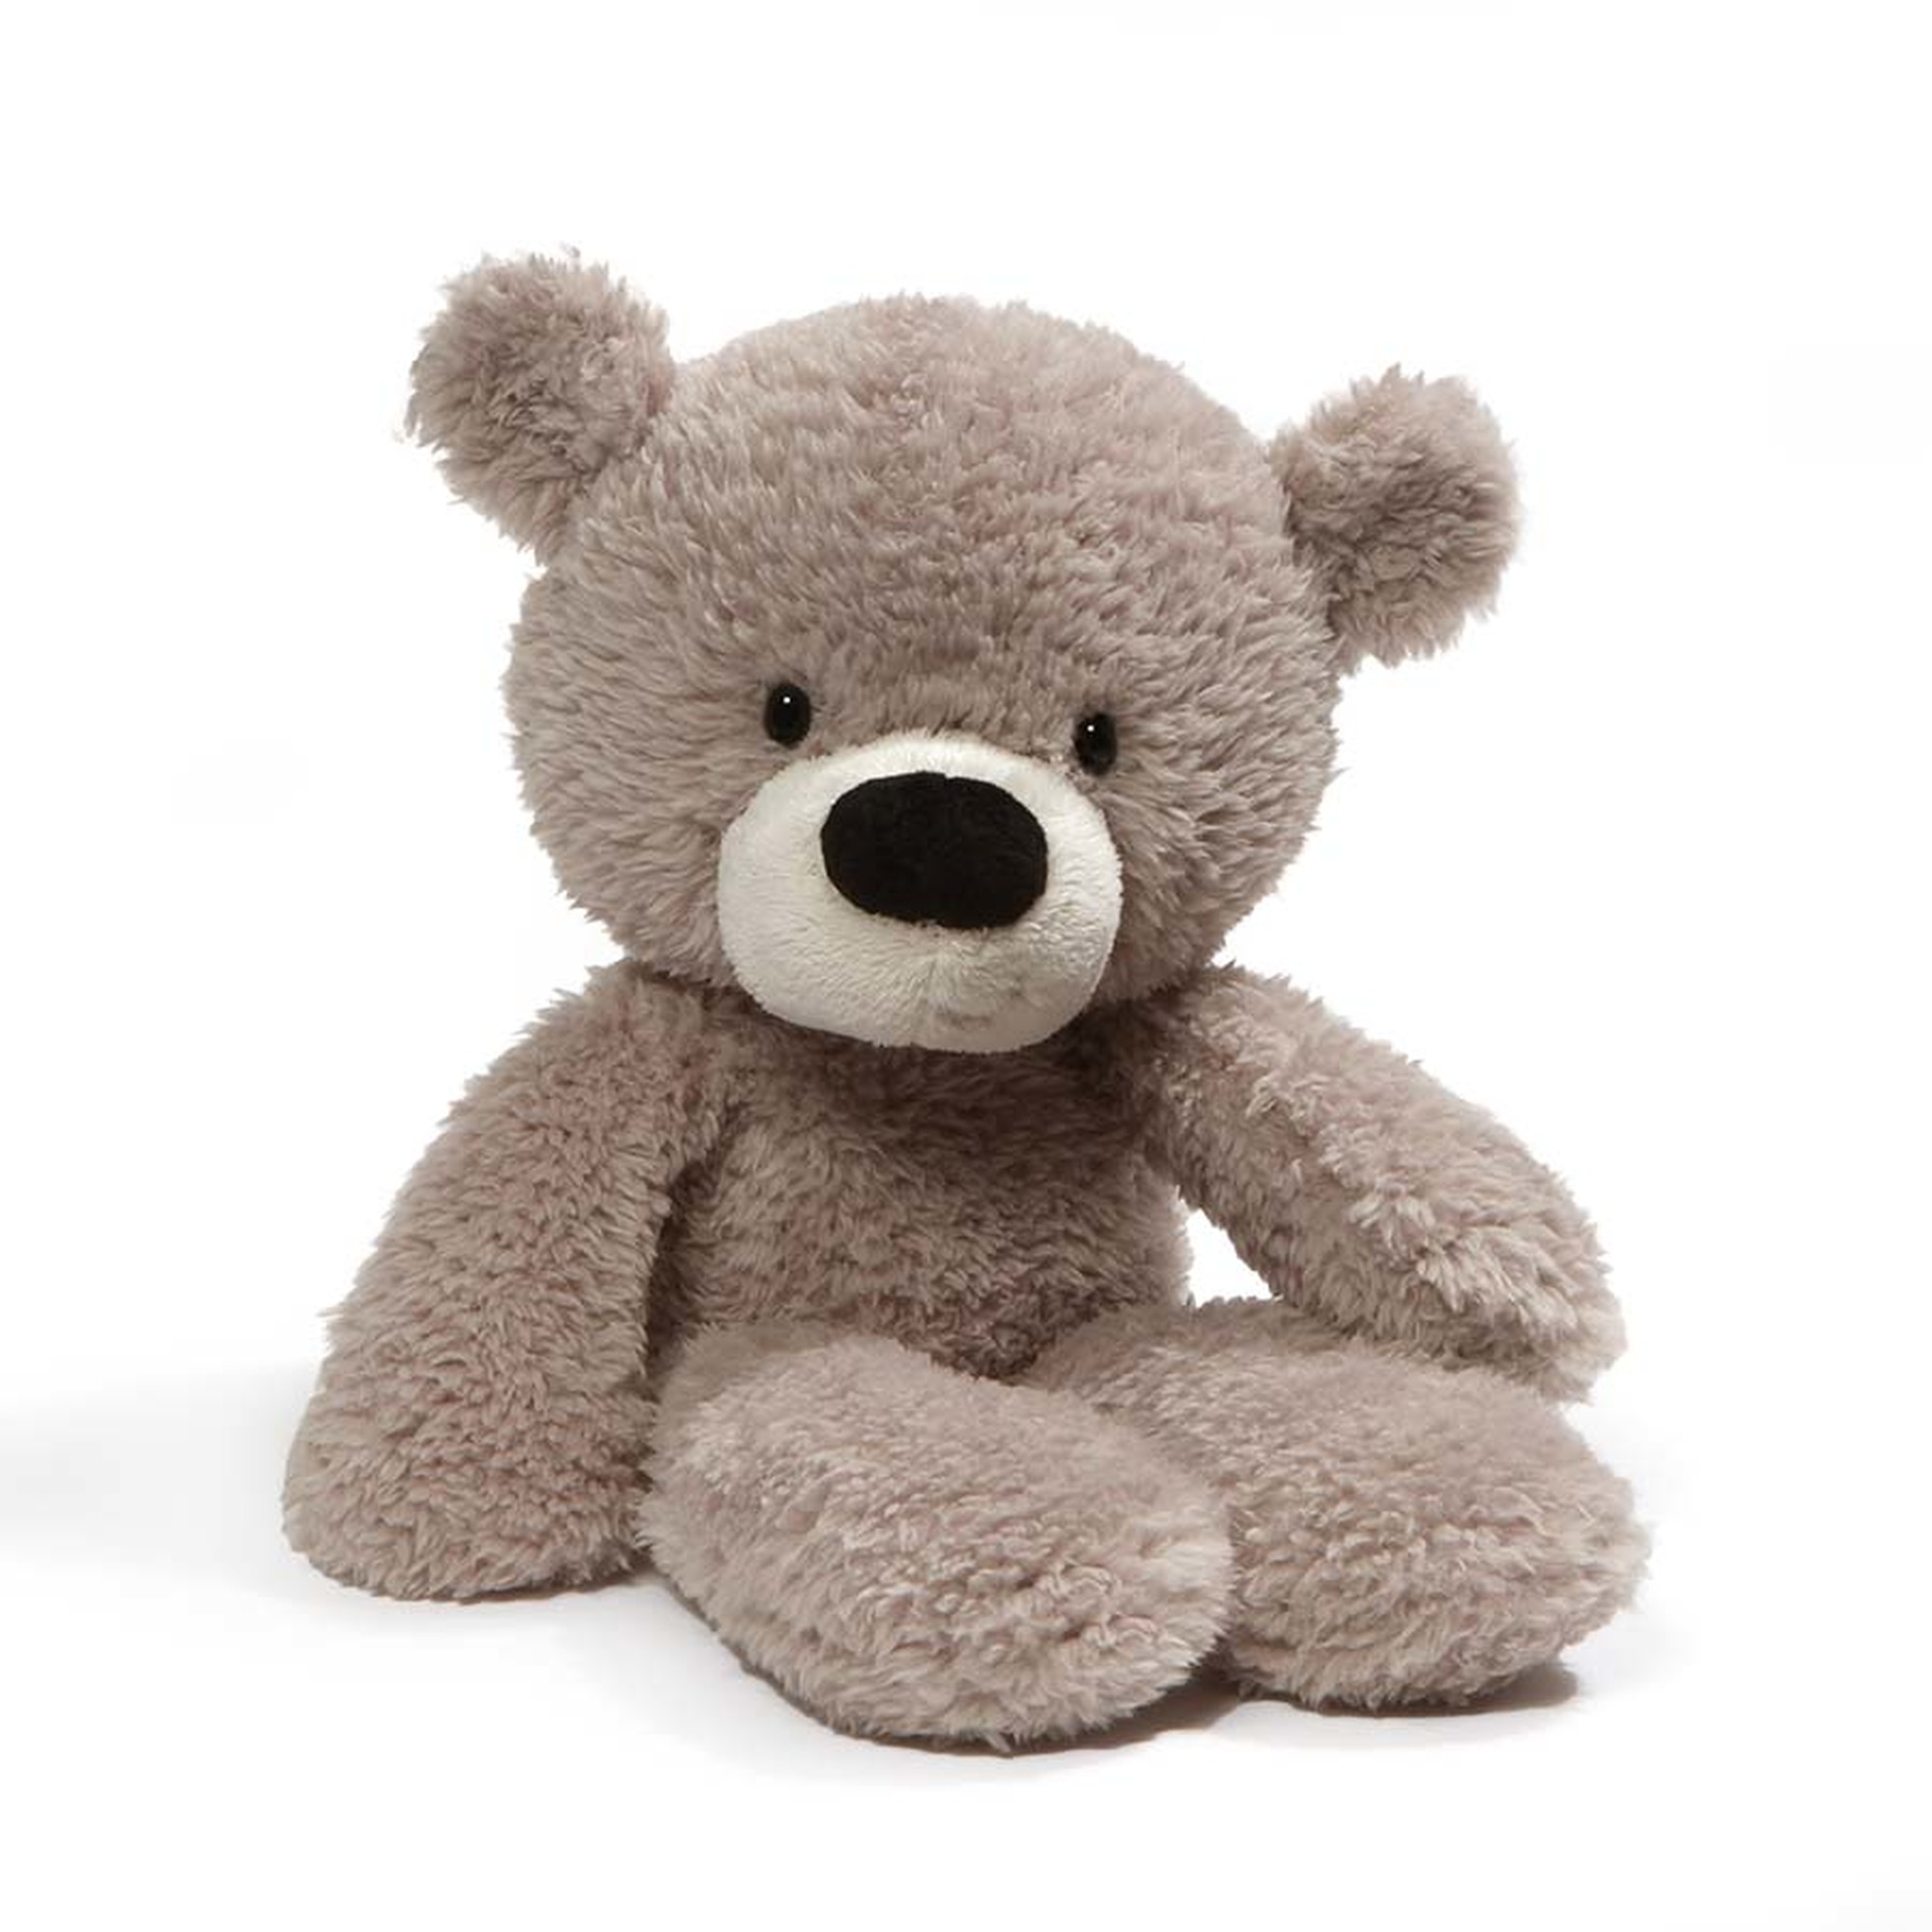 Gund Fuzzy Teddy Bear Gray 13.5 Inches - Natures Collection Soft ...